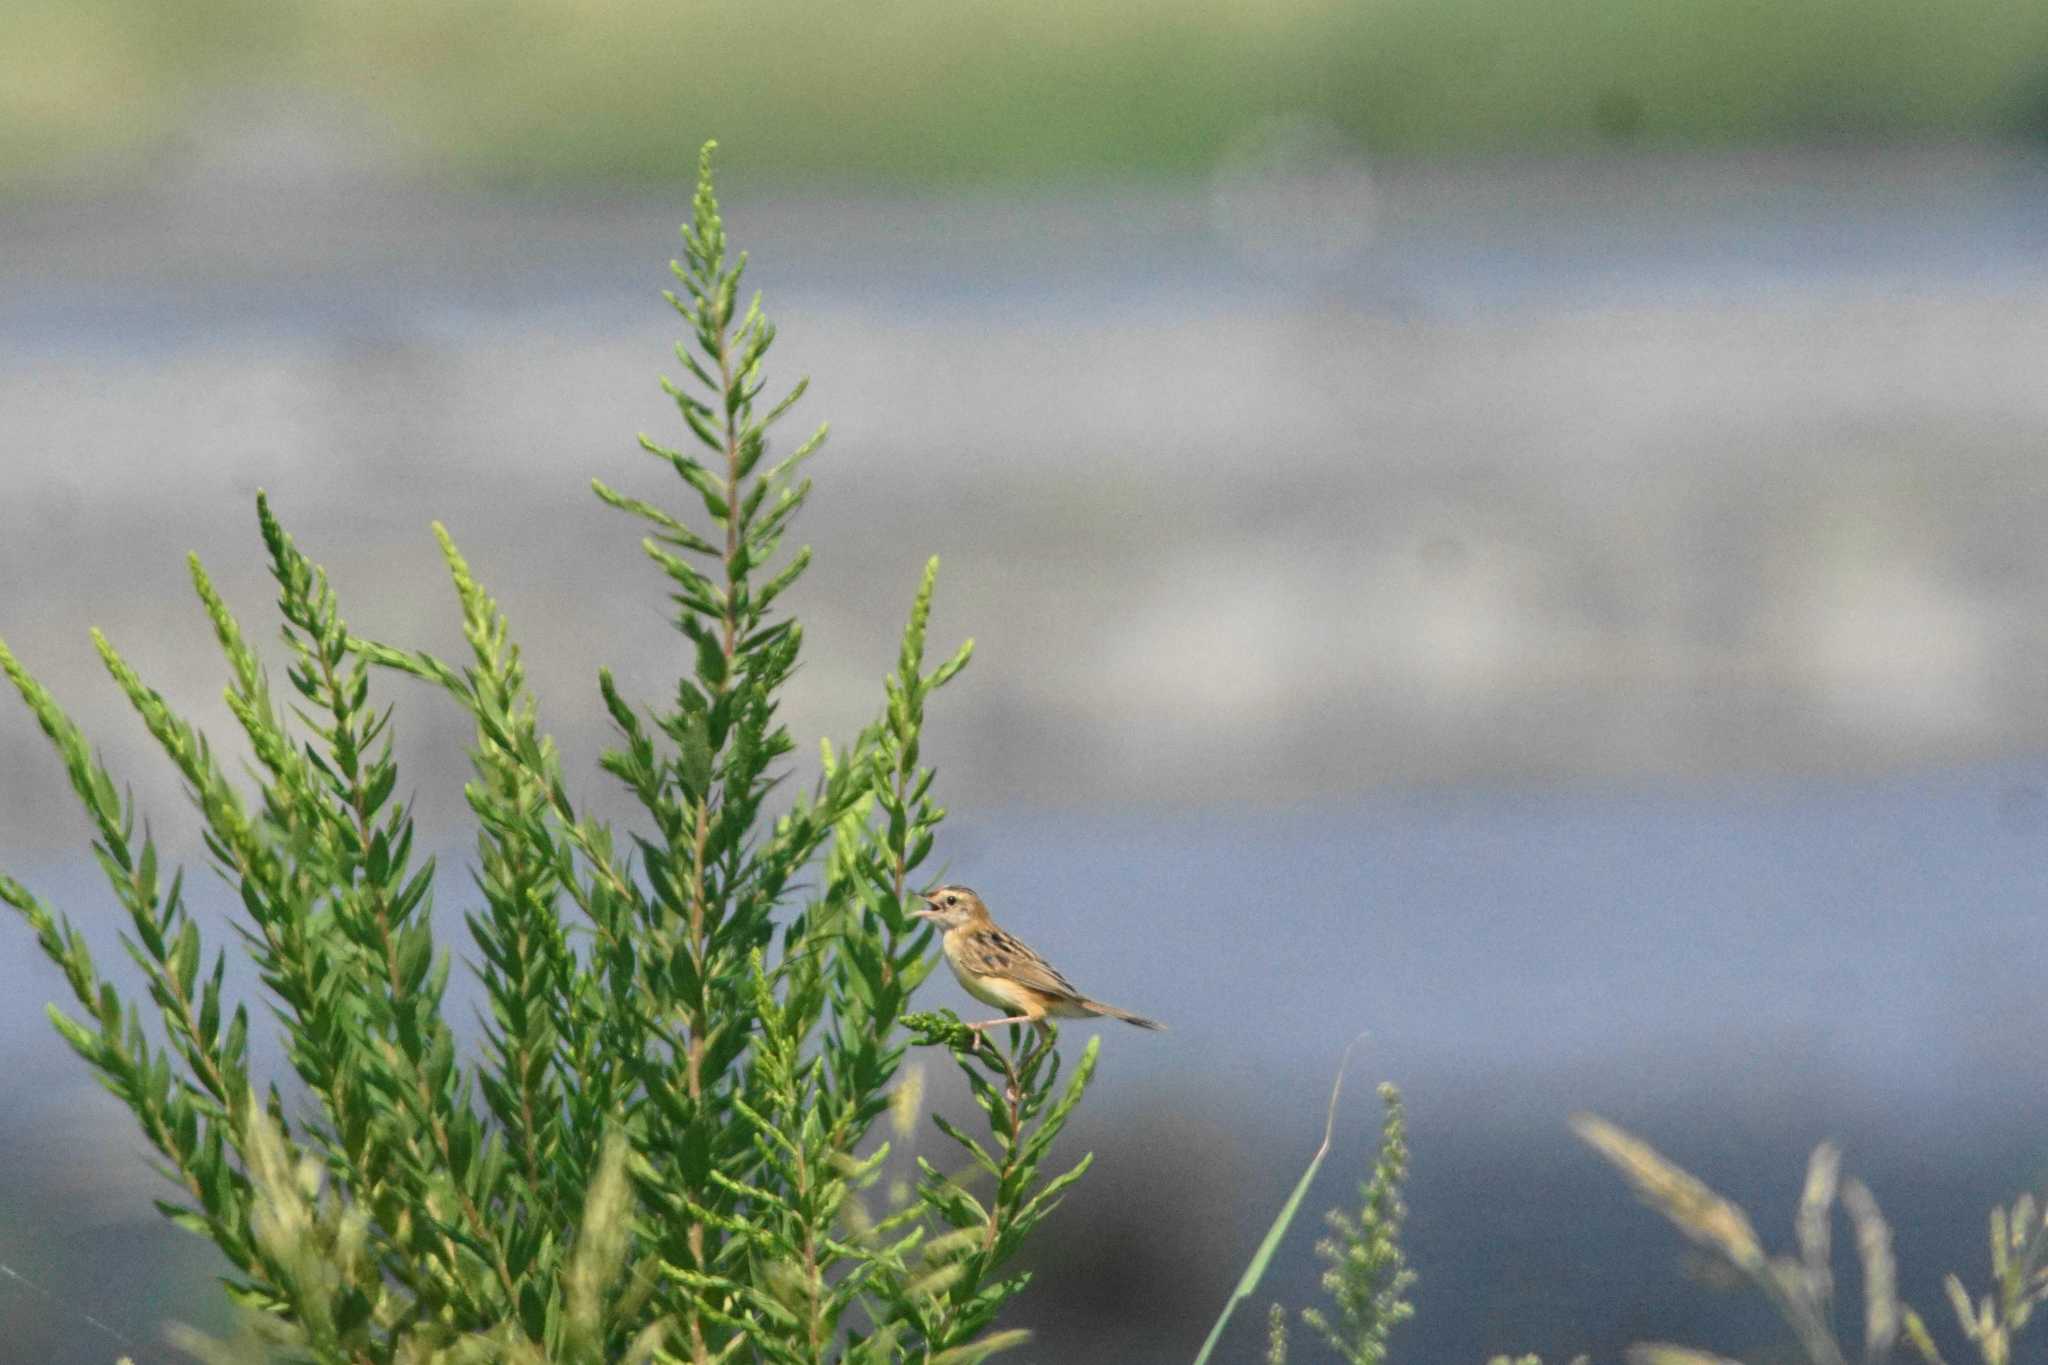 Photo of Zitting Cisticola at 酒匂川河口 by bea